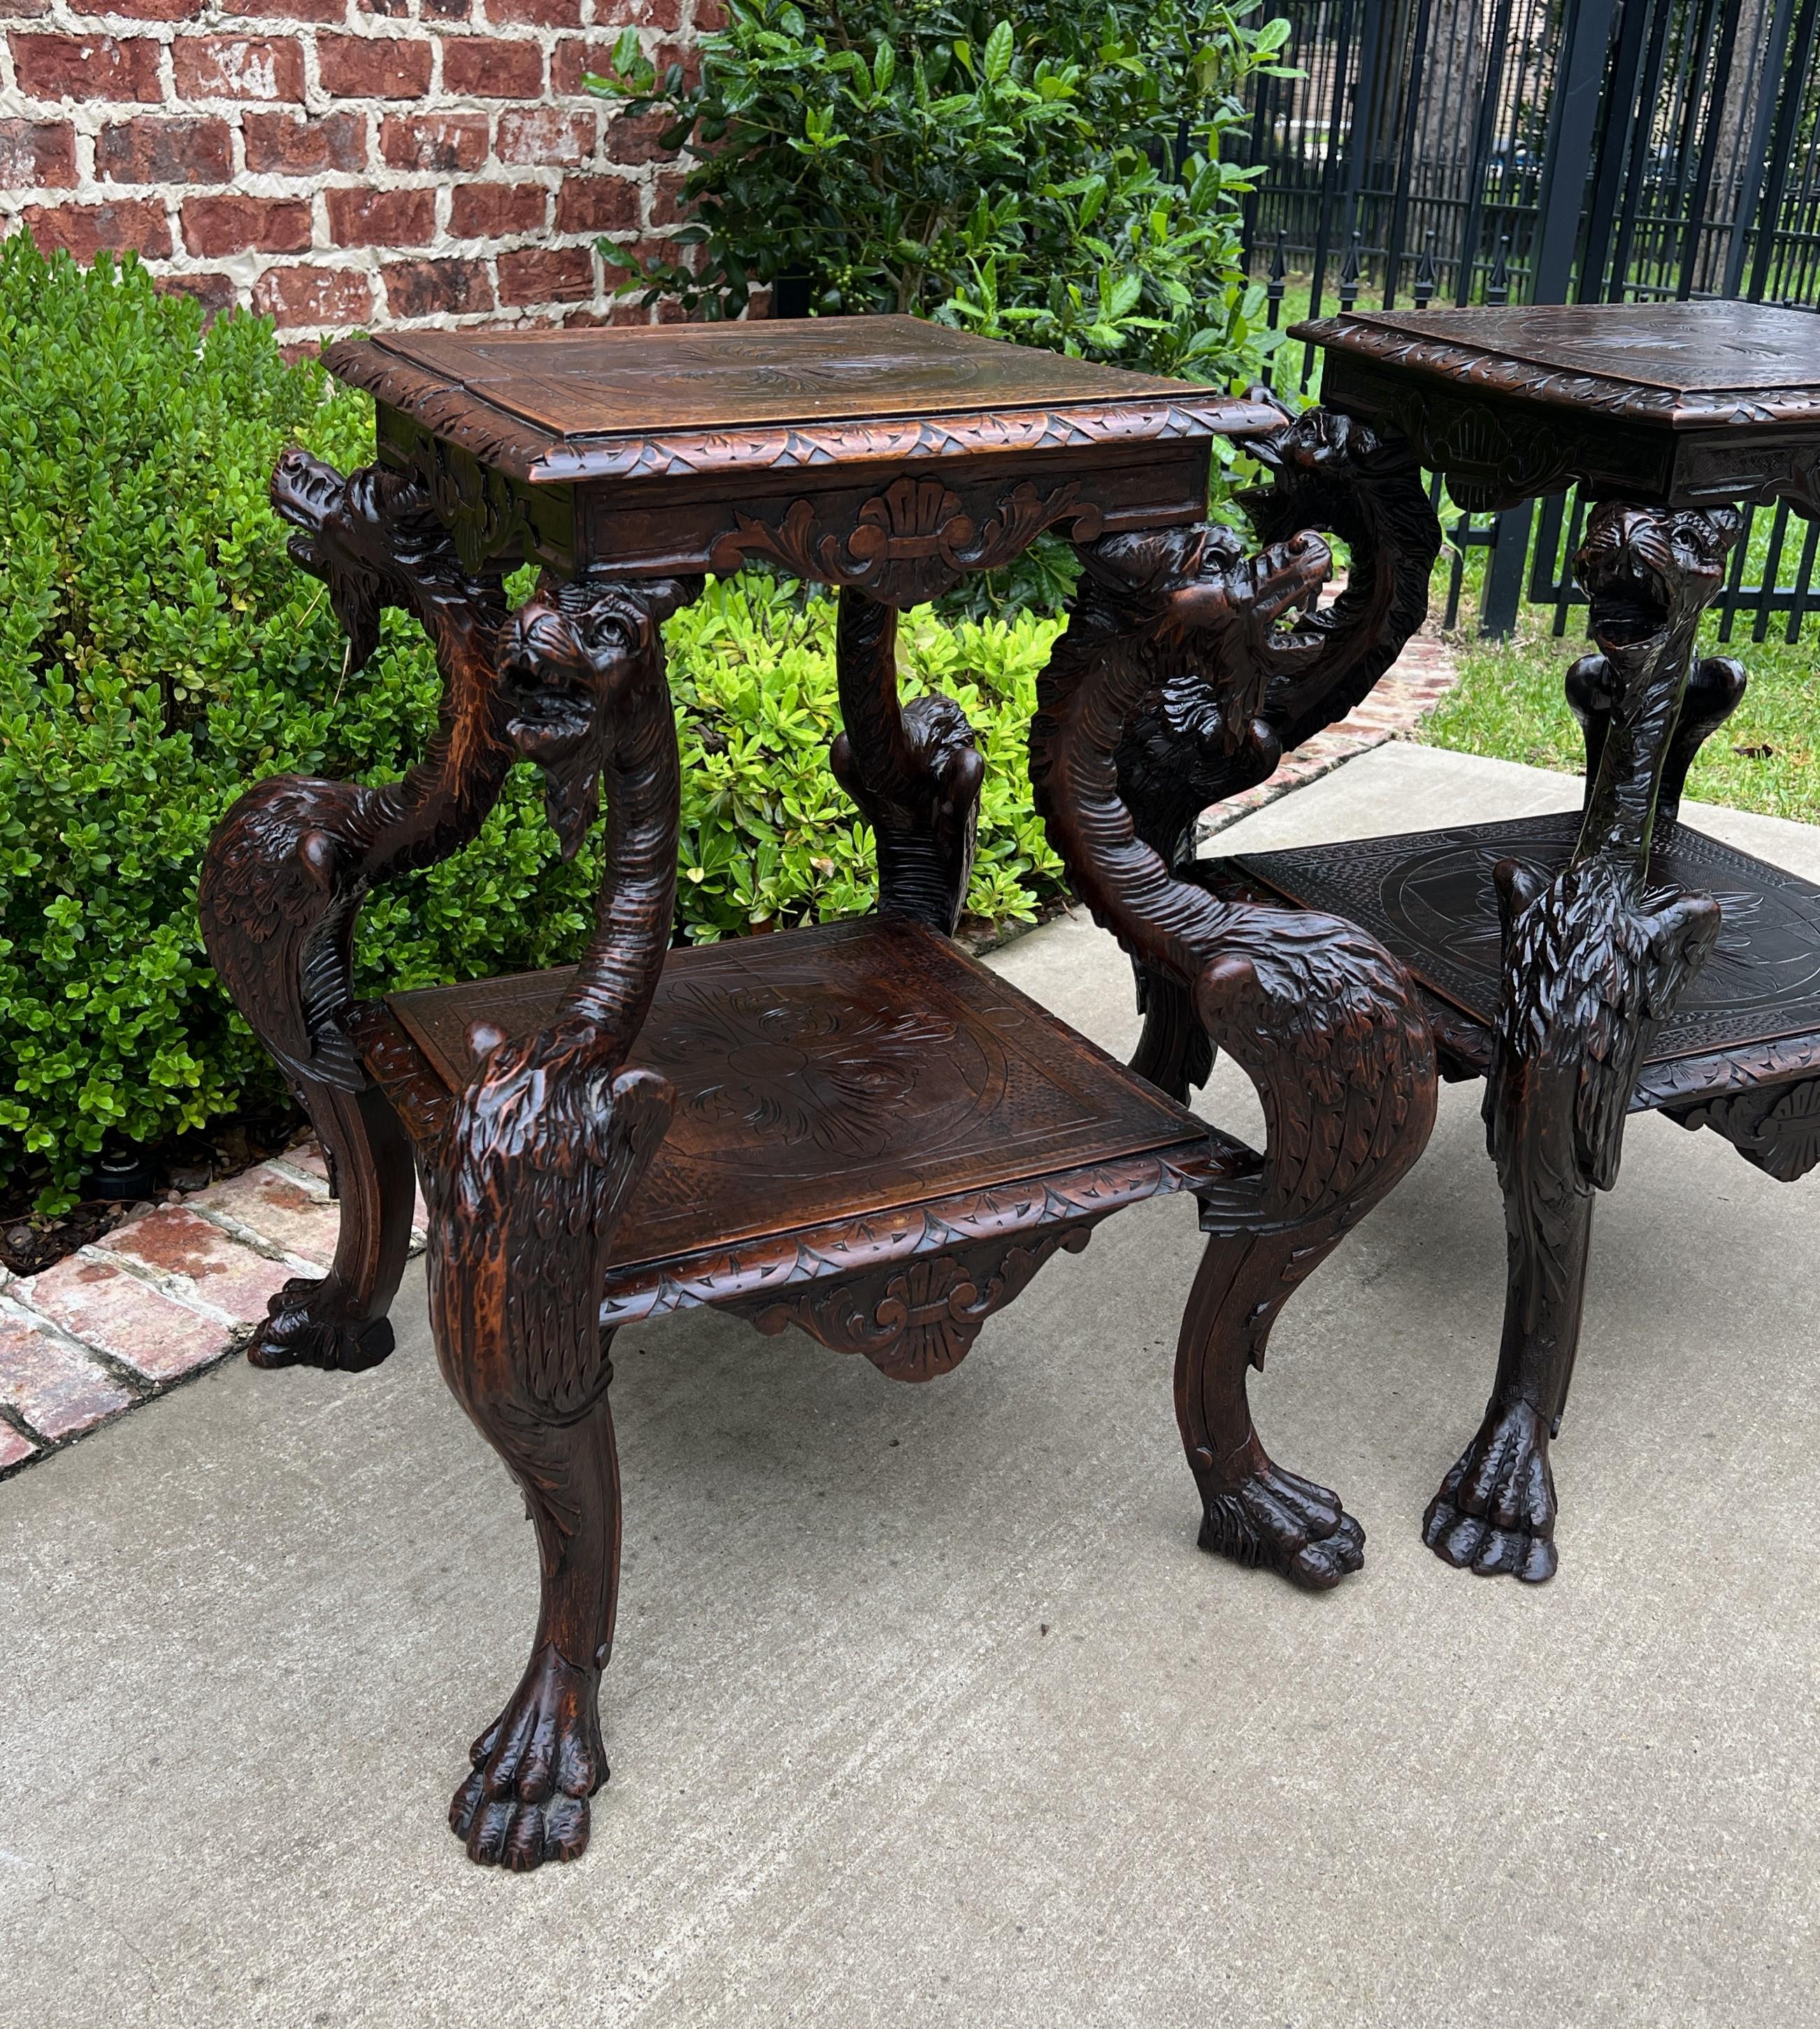 RARE EXQUISITELY CARVED Antique French Oak Gothic Revival PAIR End Tables, Side Tables, or Nightstands~ Dragons~~c. 1880s

 FANTASTIC PAIR of tables or 2-tier nightstands~~HIGHLY CARVED bearded dragon legs with hairy paw feet~~very GAME OF